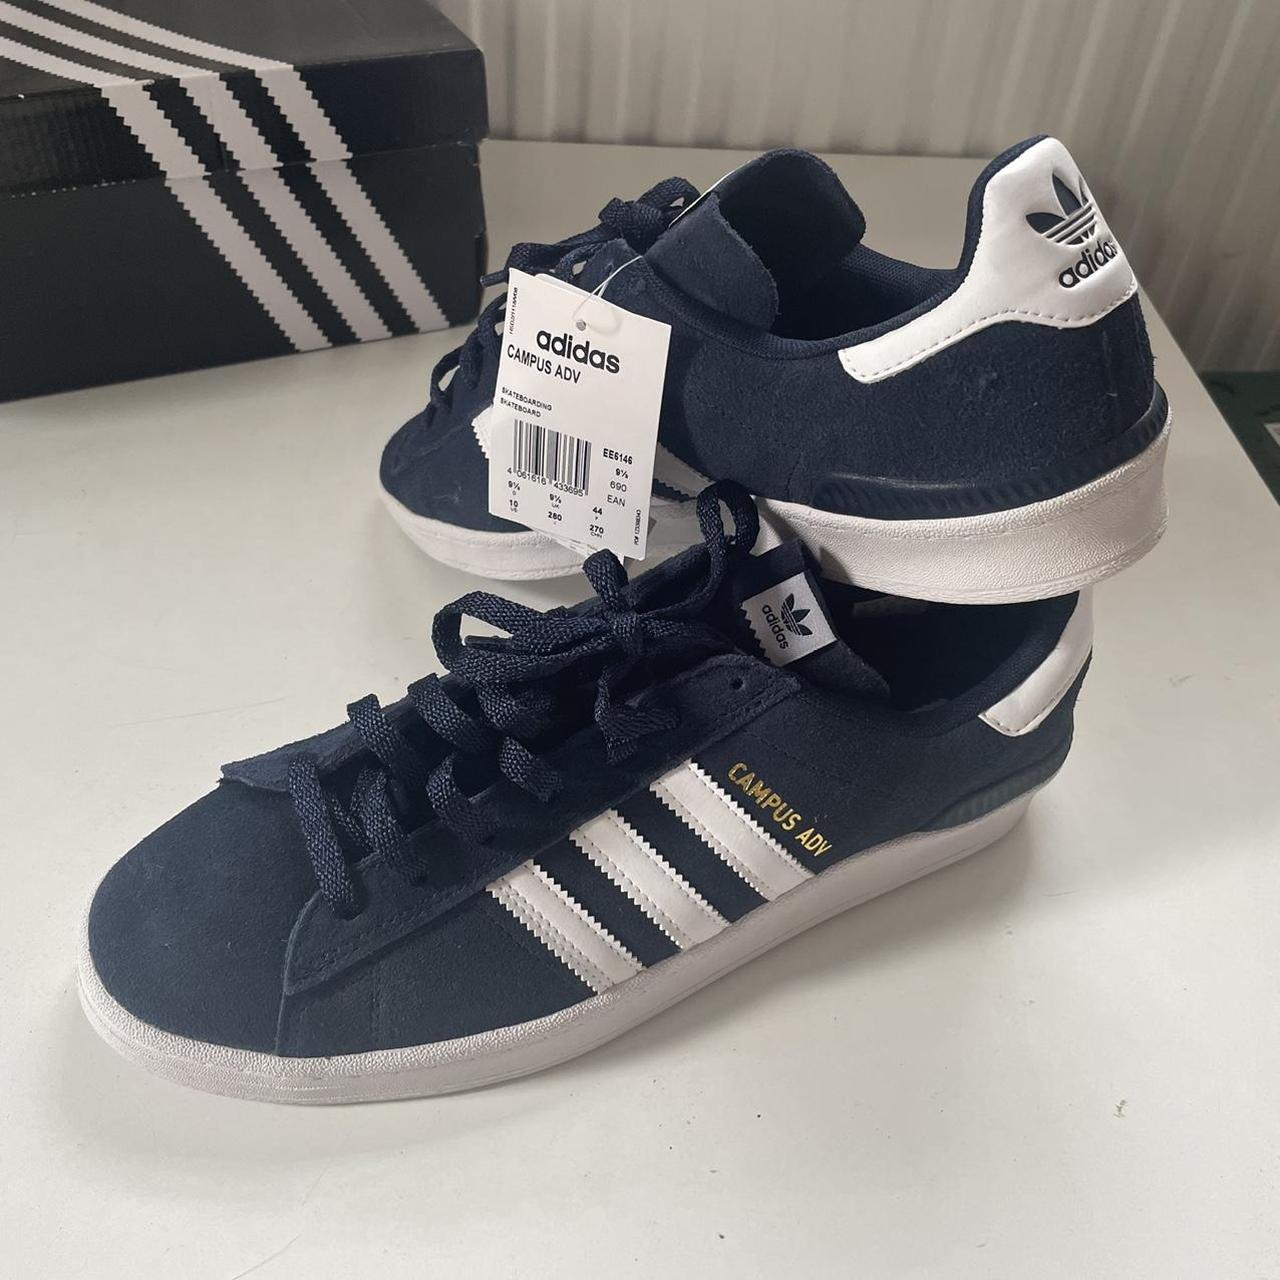 Adidas Campus ADV, navy blue, size UK 9.5 trainers.... - Depop